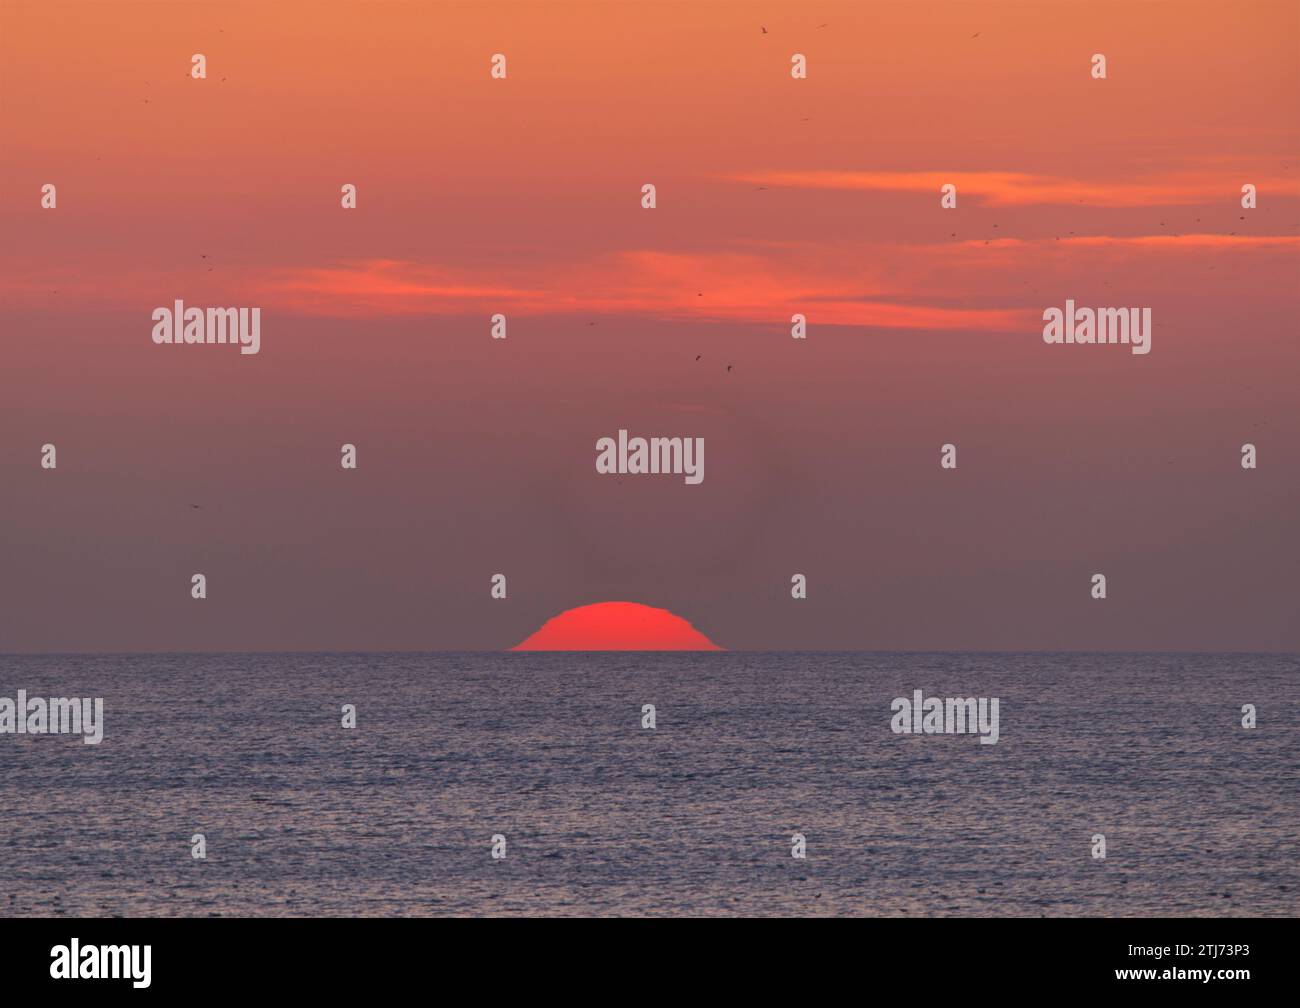 The Setting sun. A red/orange disc in the sky. Stock Photo